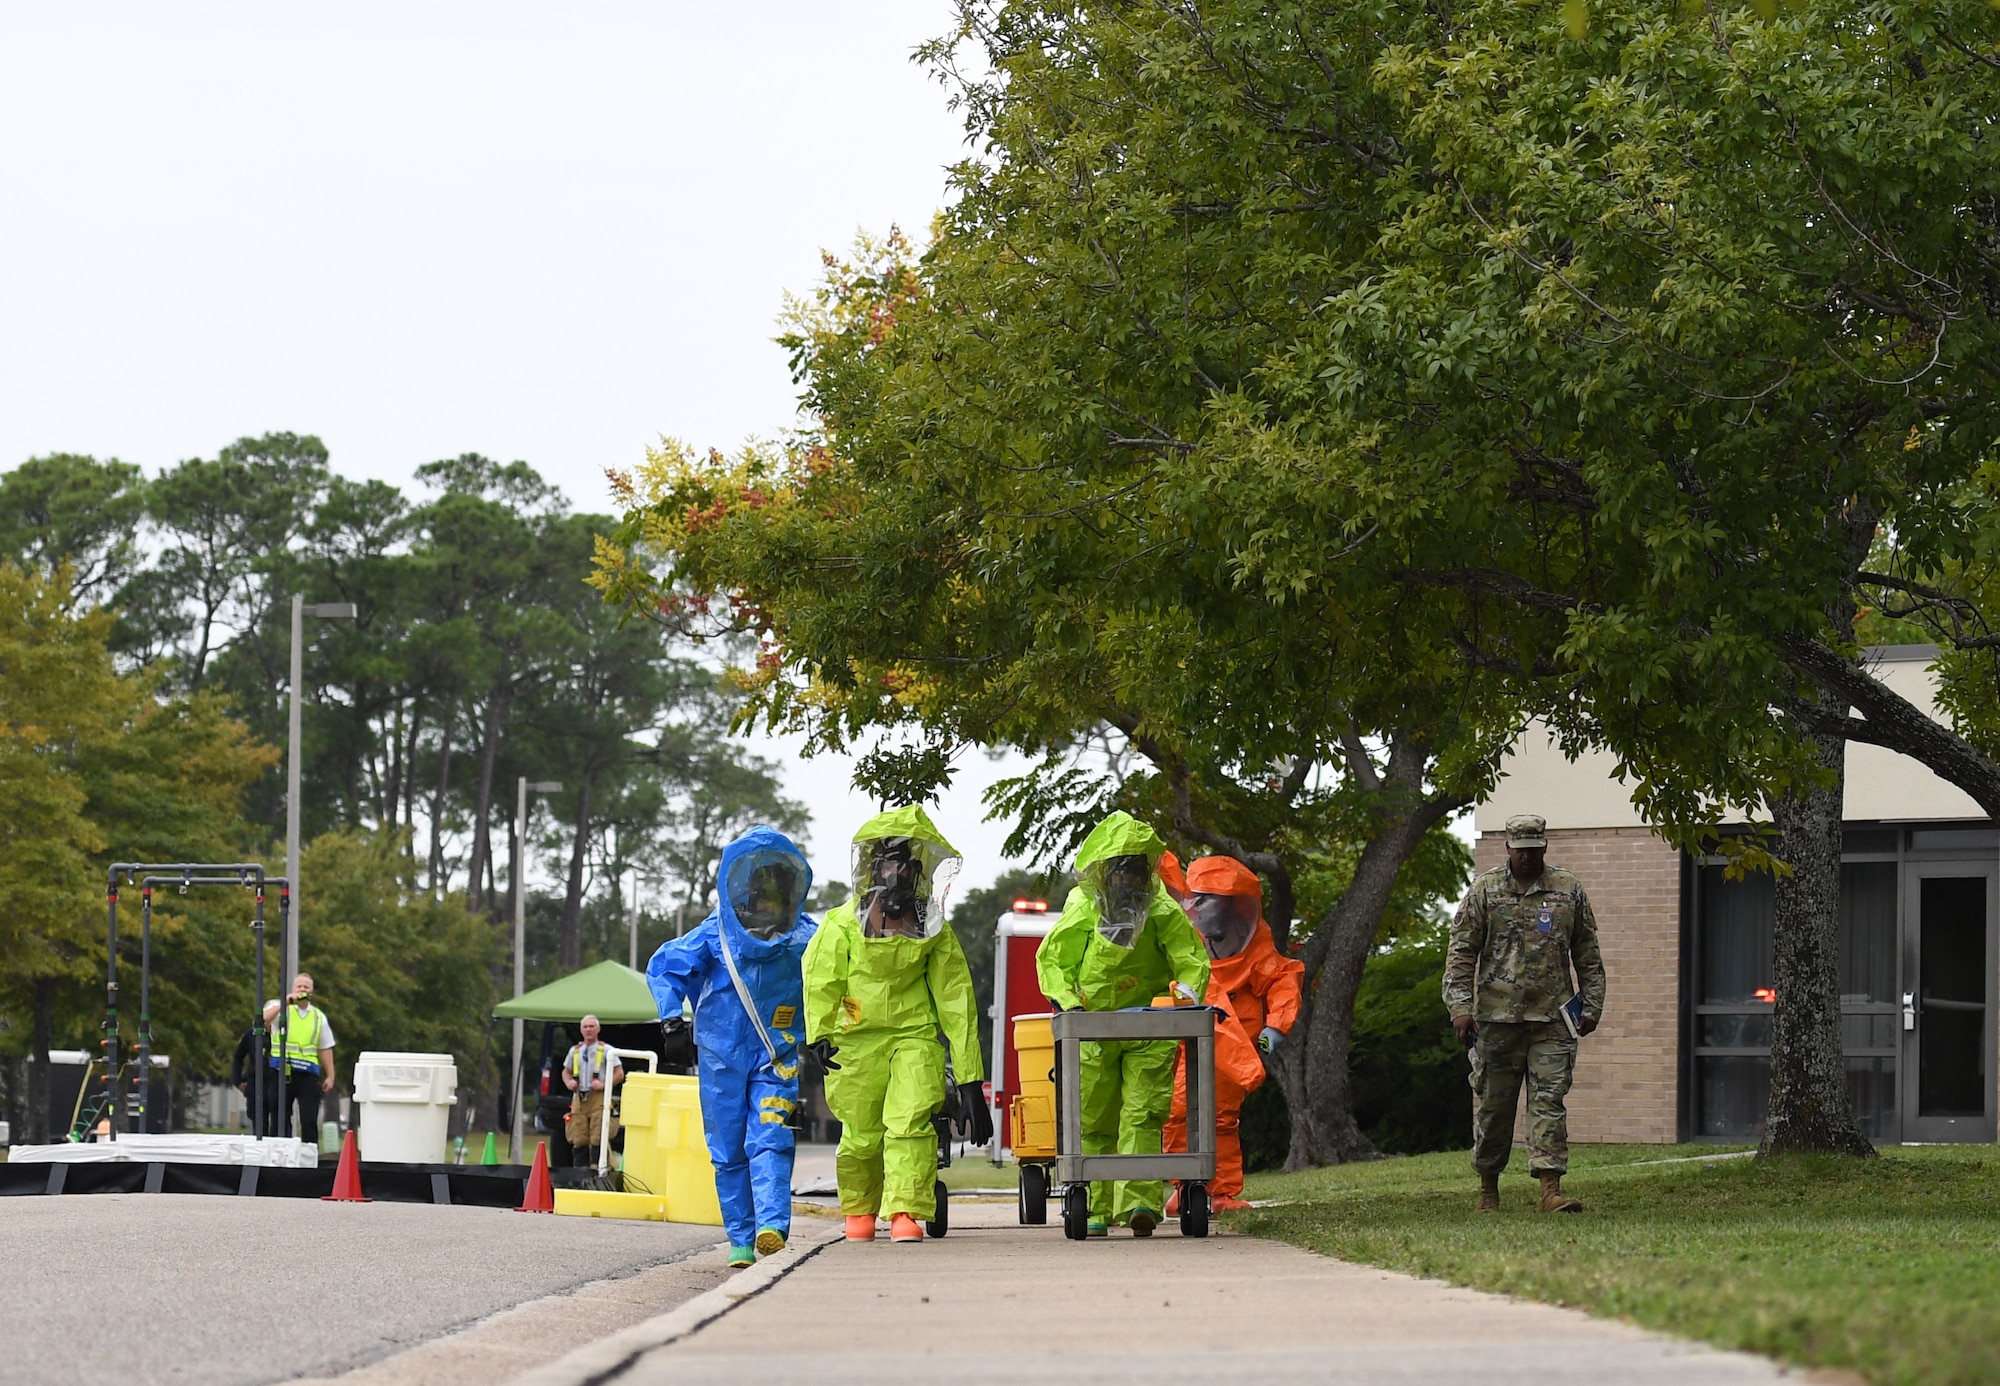 Members of the Keesler fire department, bioenvironmental and emergency management make their way to the scene for testing a simulated biological agent during the Anti-Terrorism, Force Protection Condition and Chemical, Biological, Radiological, Nuclear and high-yield Explosives training exercise near the Live Oak Dining Facility at Keesler Air Force Base, Mississippi, Oct. 24, 2019. The exercise scenario simulated a gym bag with ricin found by Keesler personnel who alerted first responders. The exercise was conducted to evaluate the mission readiness and security of Keesler. (U.S. Air Force photo by Kemberly Groue)